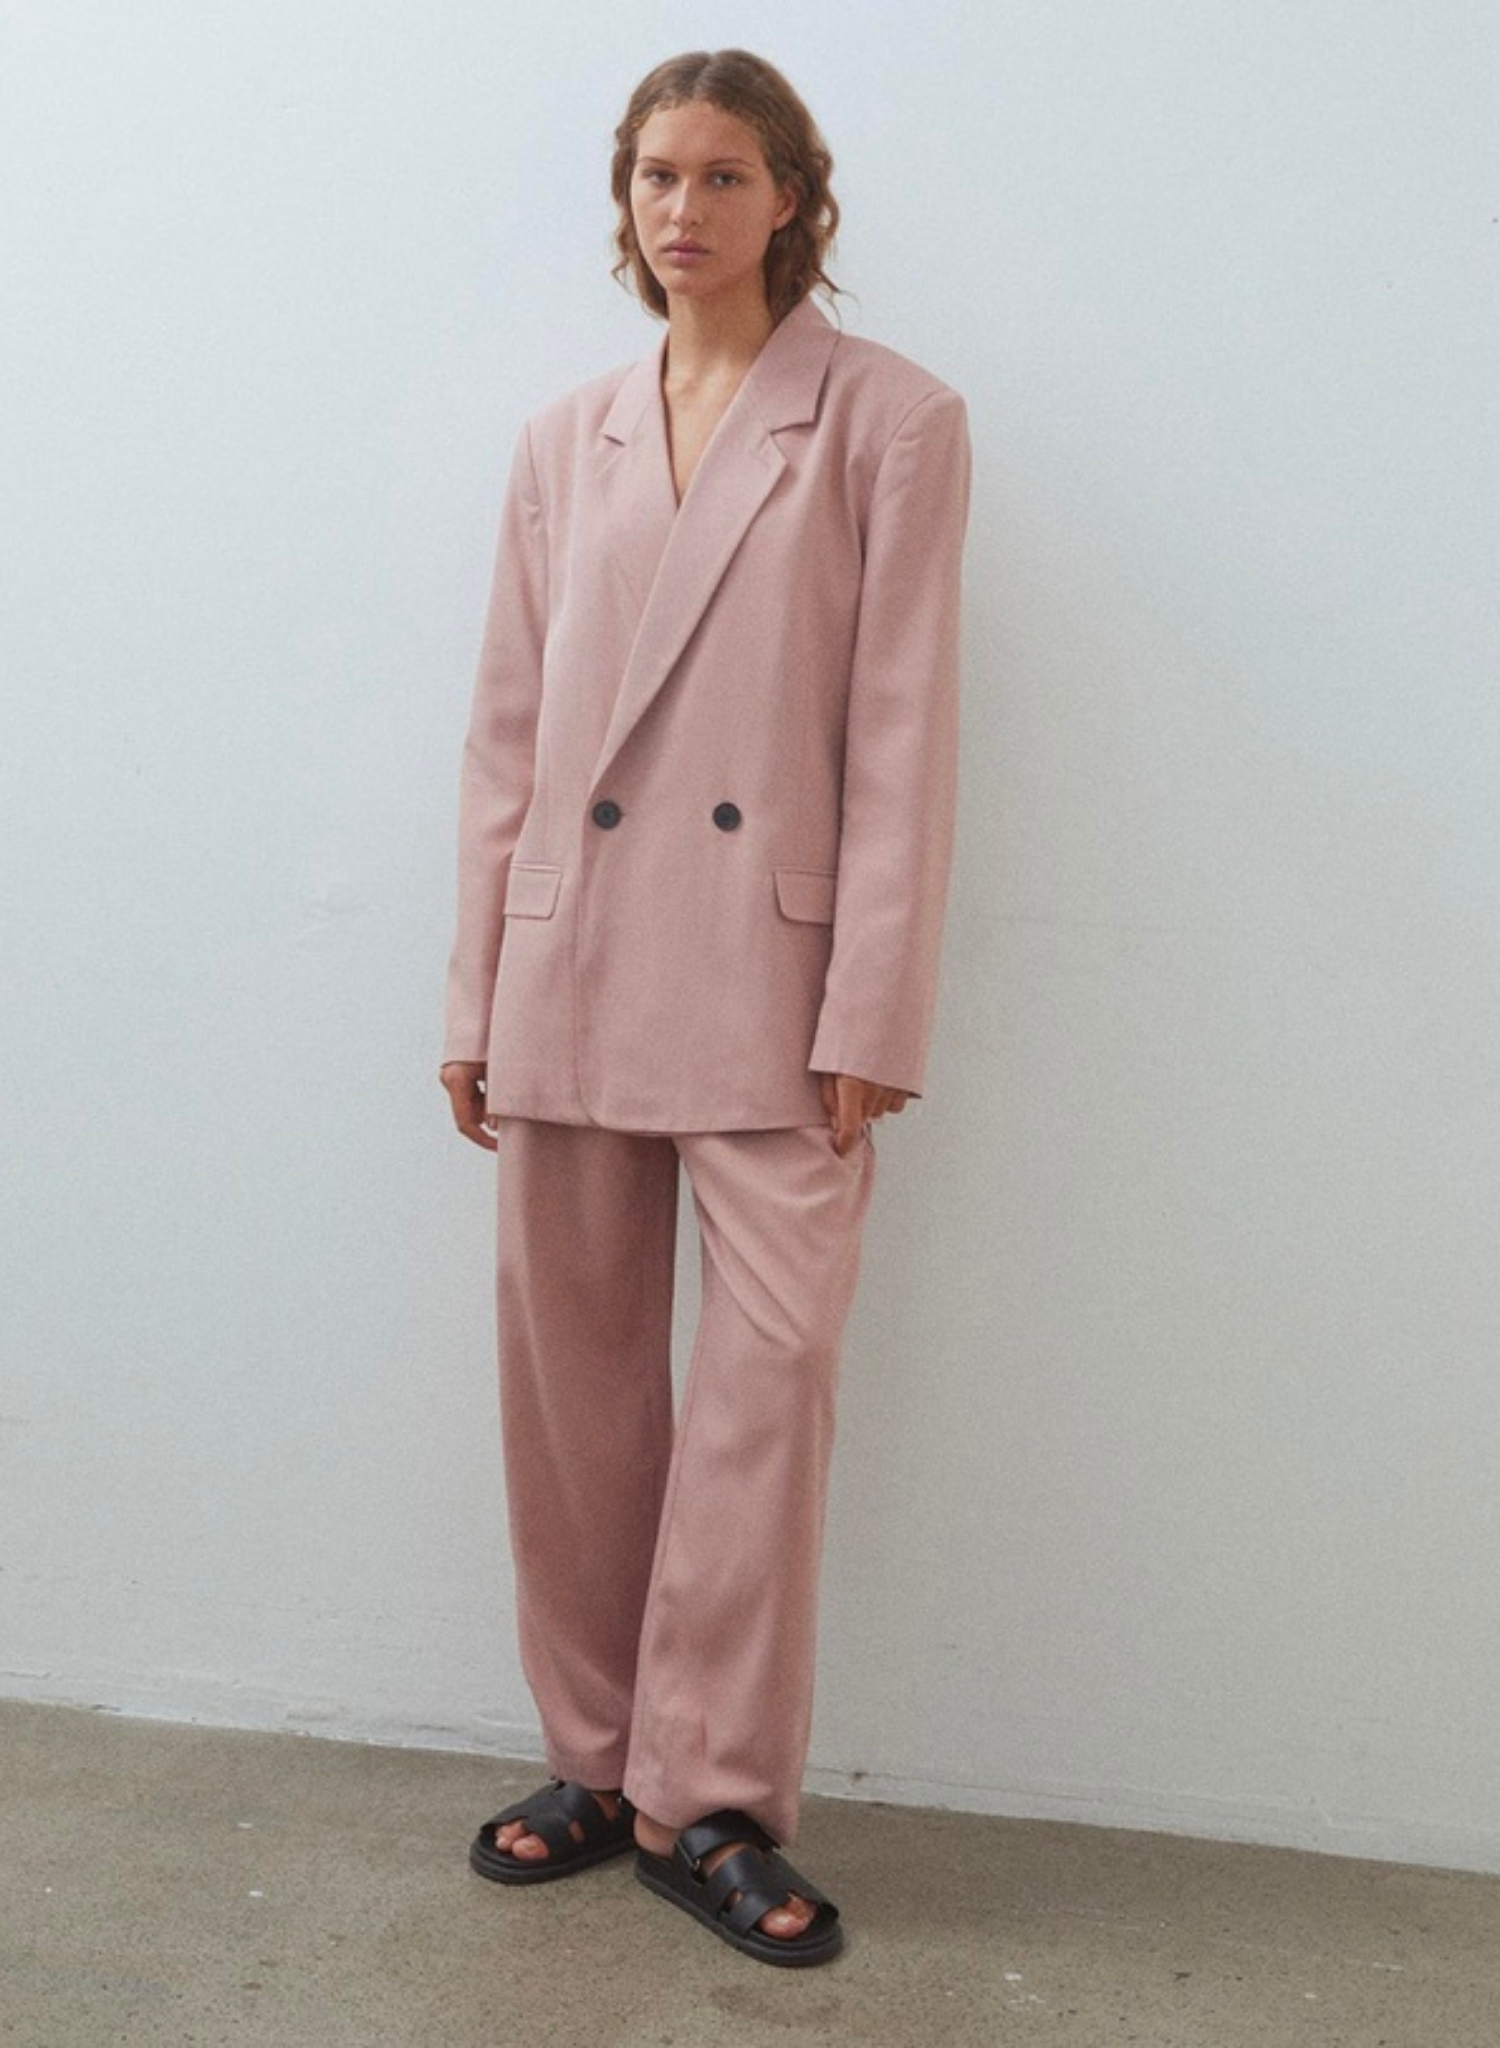 Introducing the Dana in Dusty Pink, a double-breasted suit jacket with charming lapels. This outerwear piece takes notes from men’s tailoring with considered darts for definition at the waist.